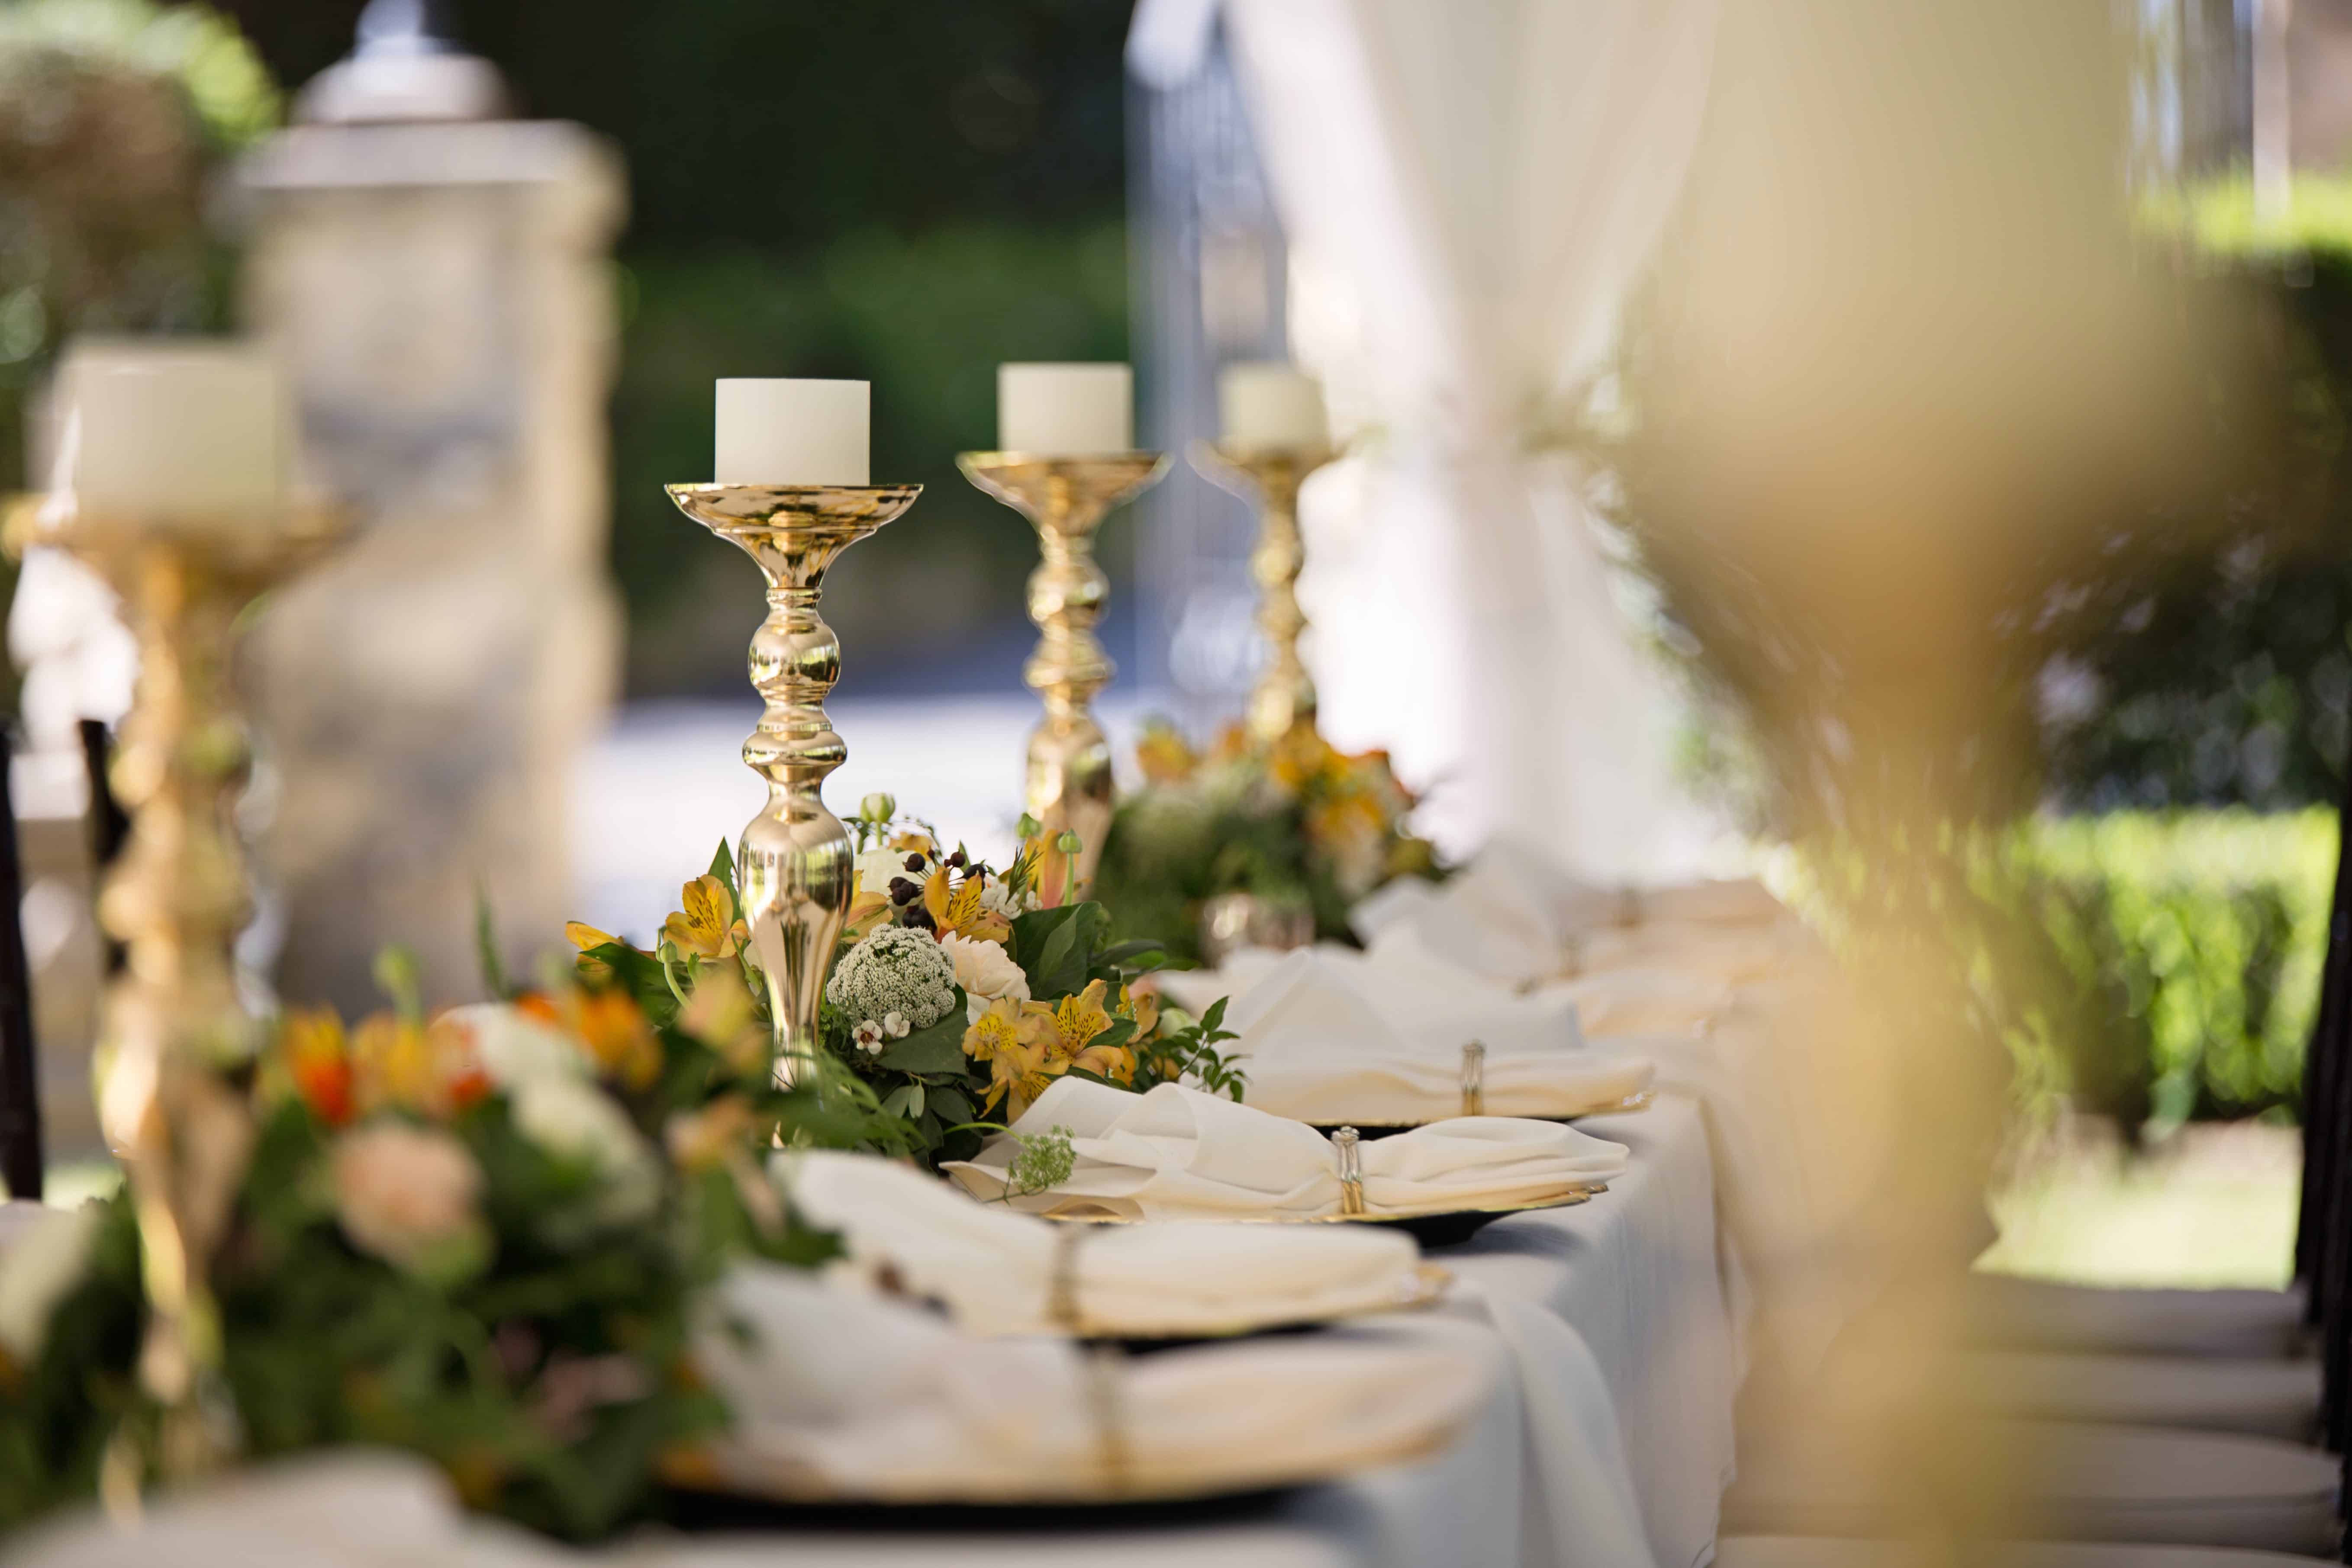 Free Selective Focus of Candlesticks on Table With Wedding Set-up Stock Photo